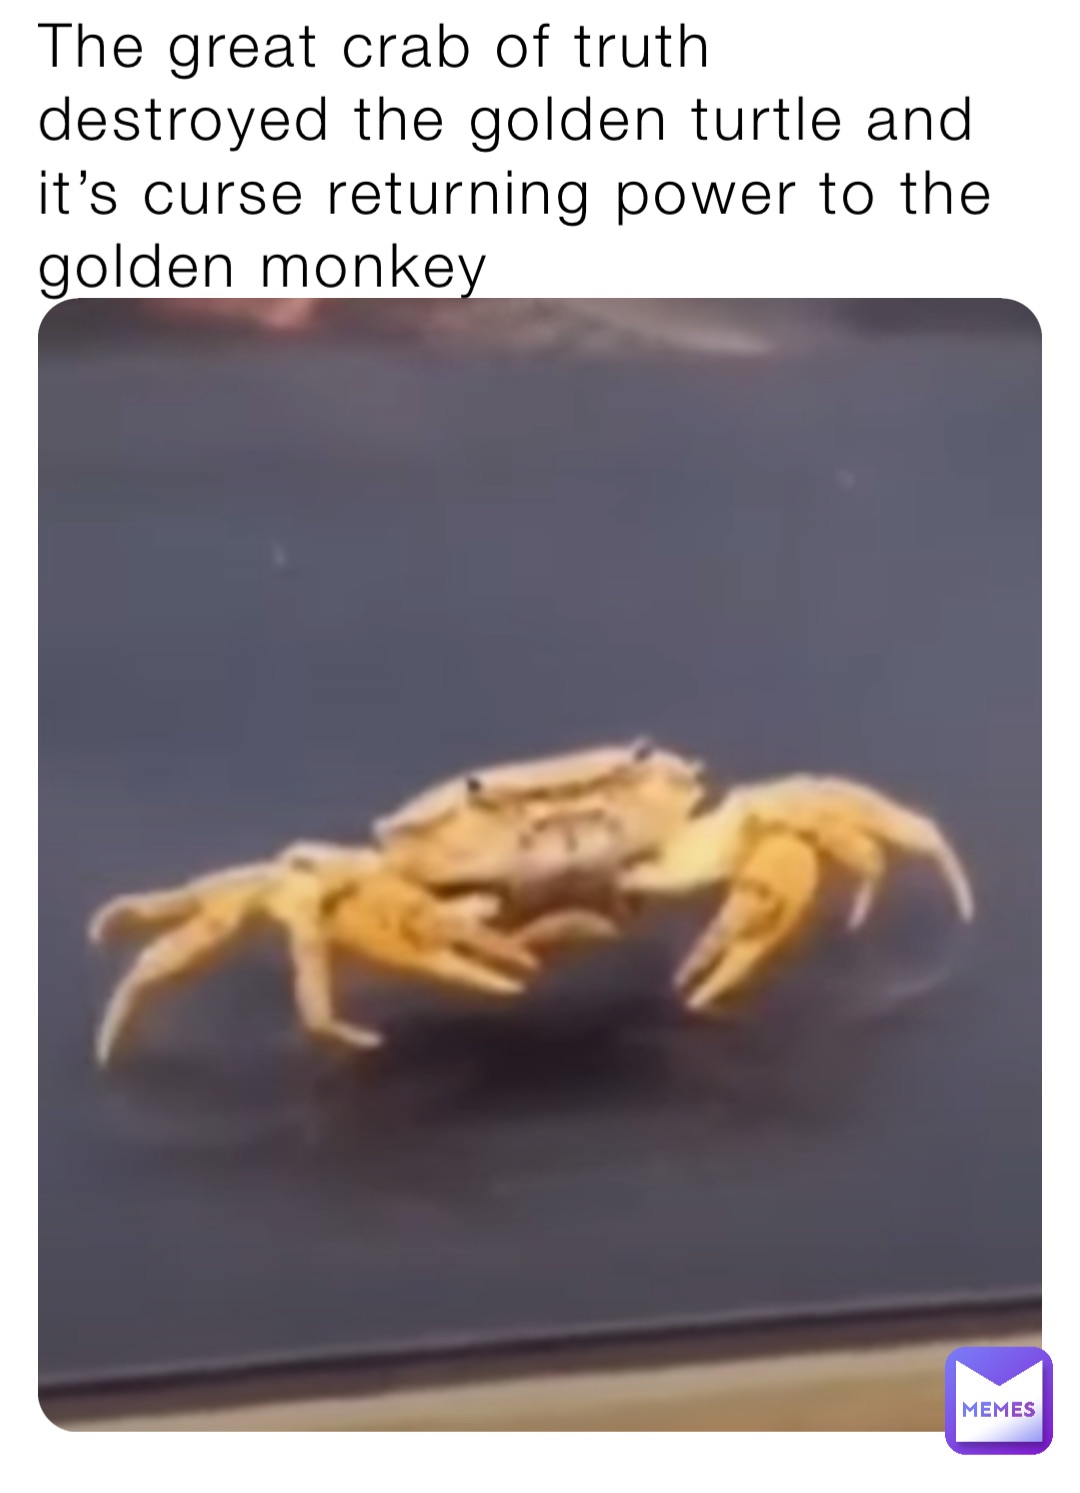 The great crab of truth destroyed the golden turtle and it’s curse returning power to the golden monkey